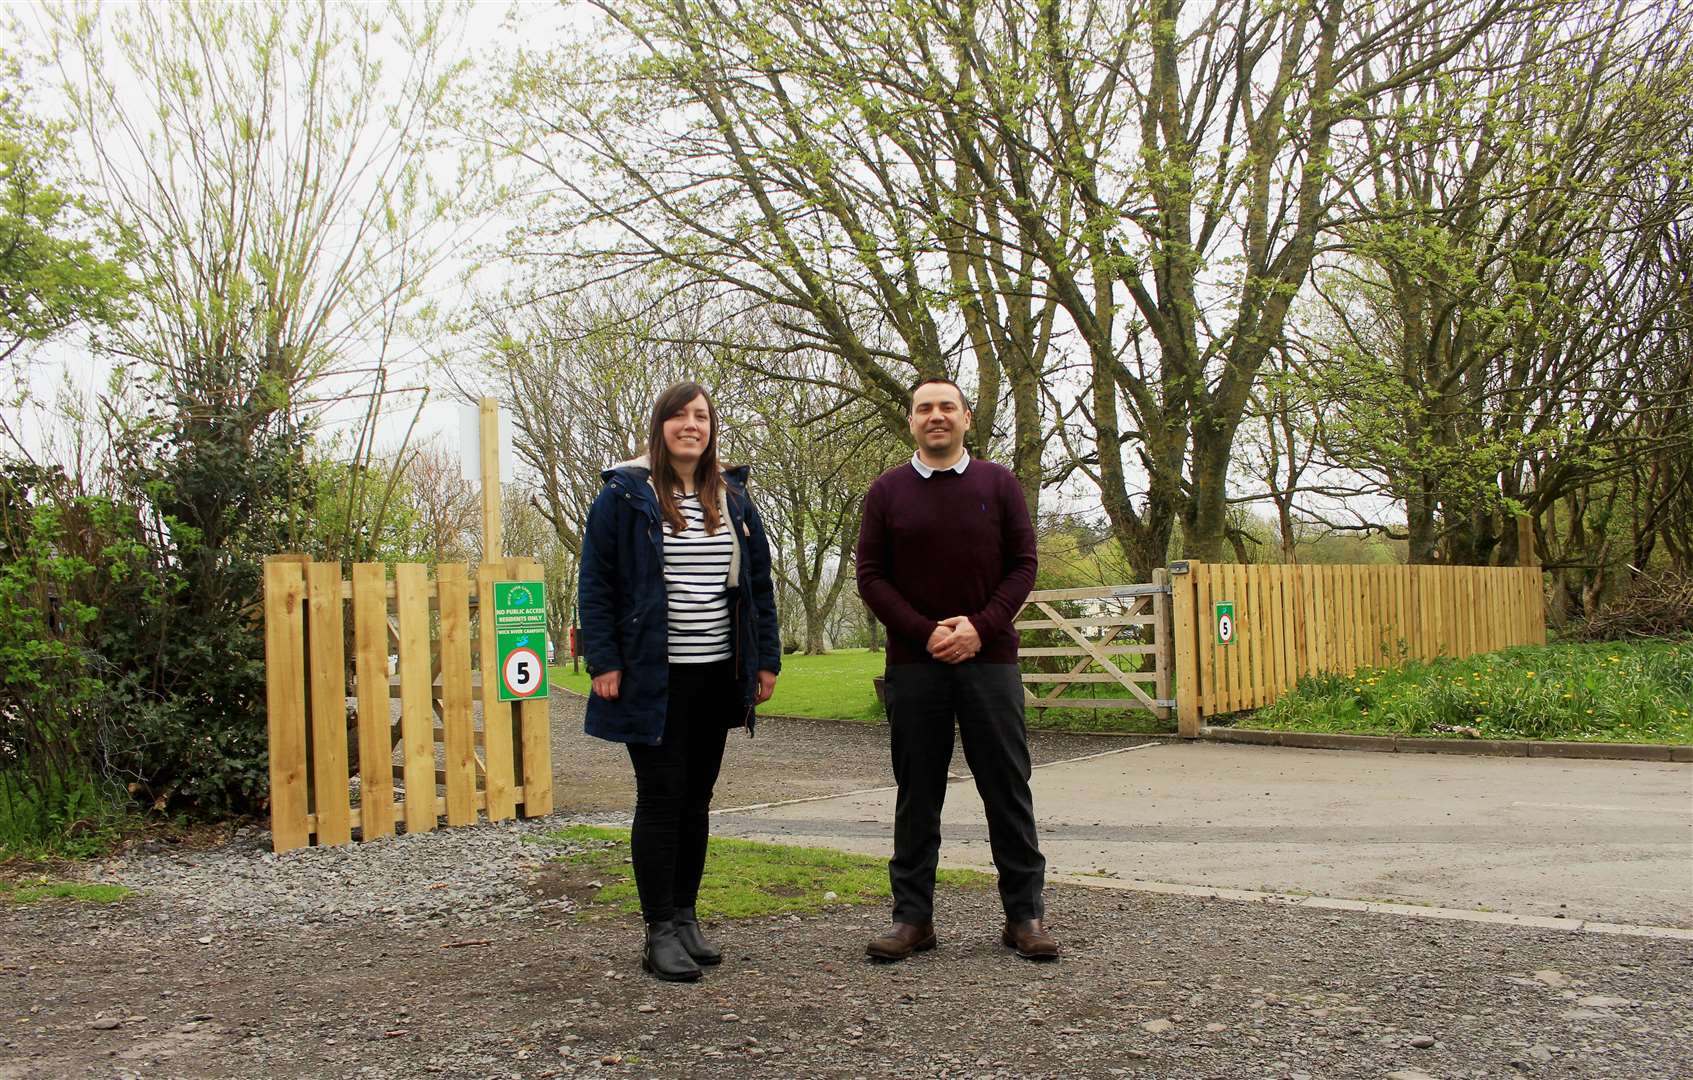 Wick Development Trust chairman Jonathan Miller with project officer Sarah Lamb at the entrance to the riverside campsite.